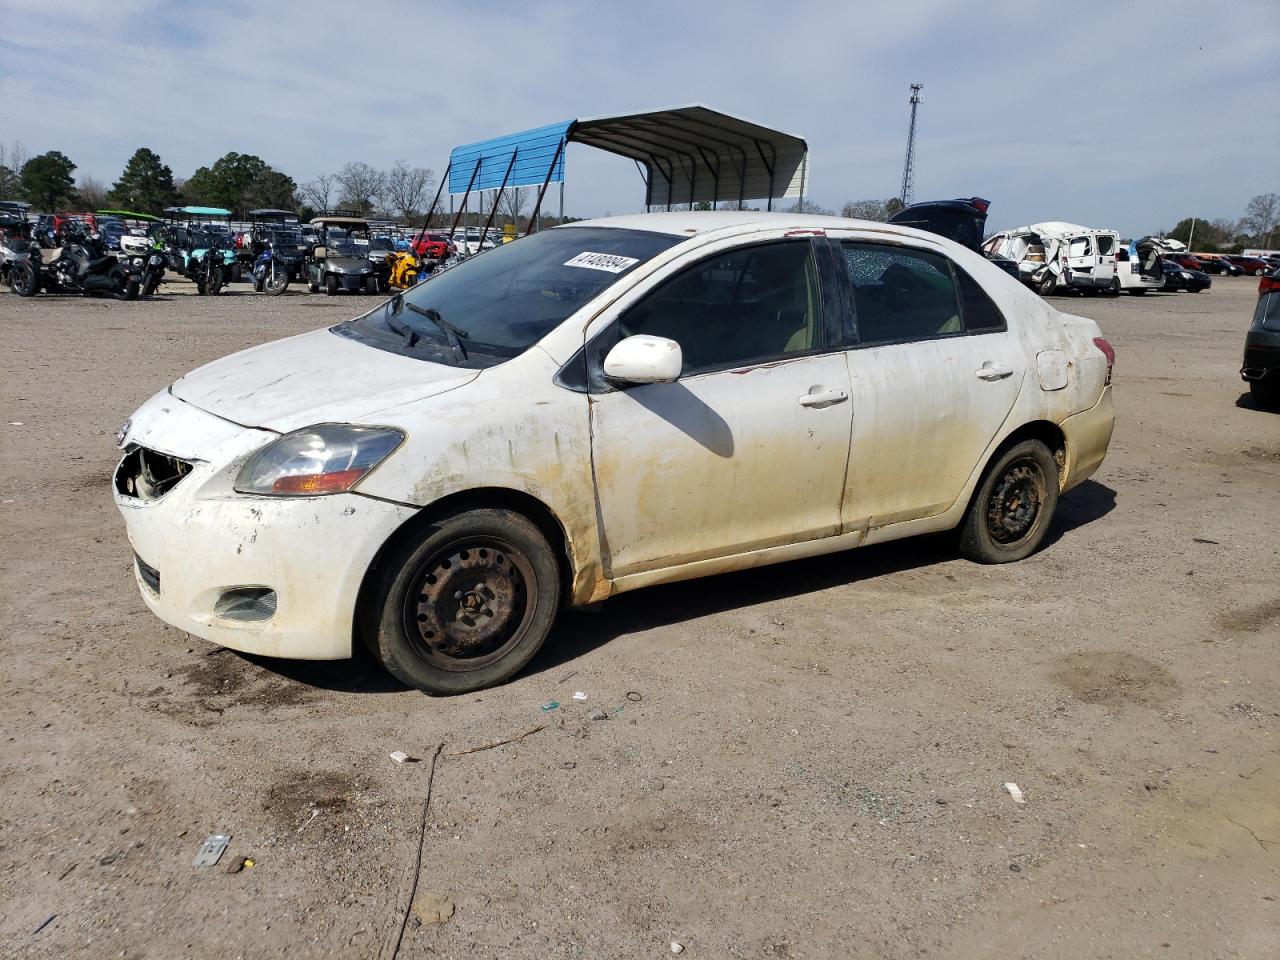 JTDBT923171****** Salvage and Wrecked 2007 Toyota Yaris in AL - Newton